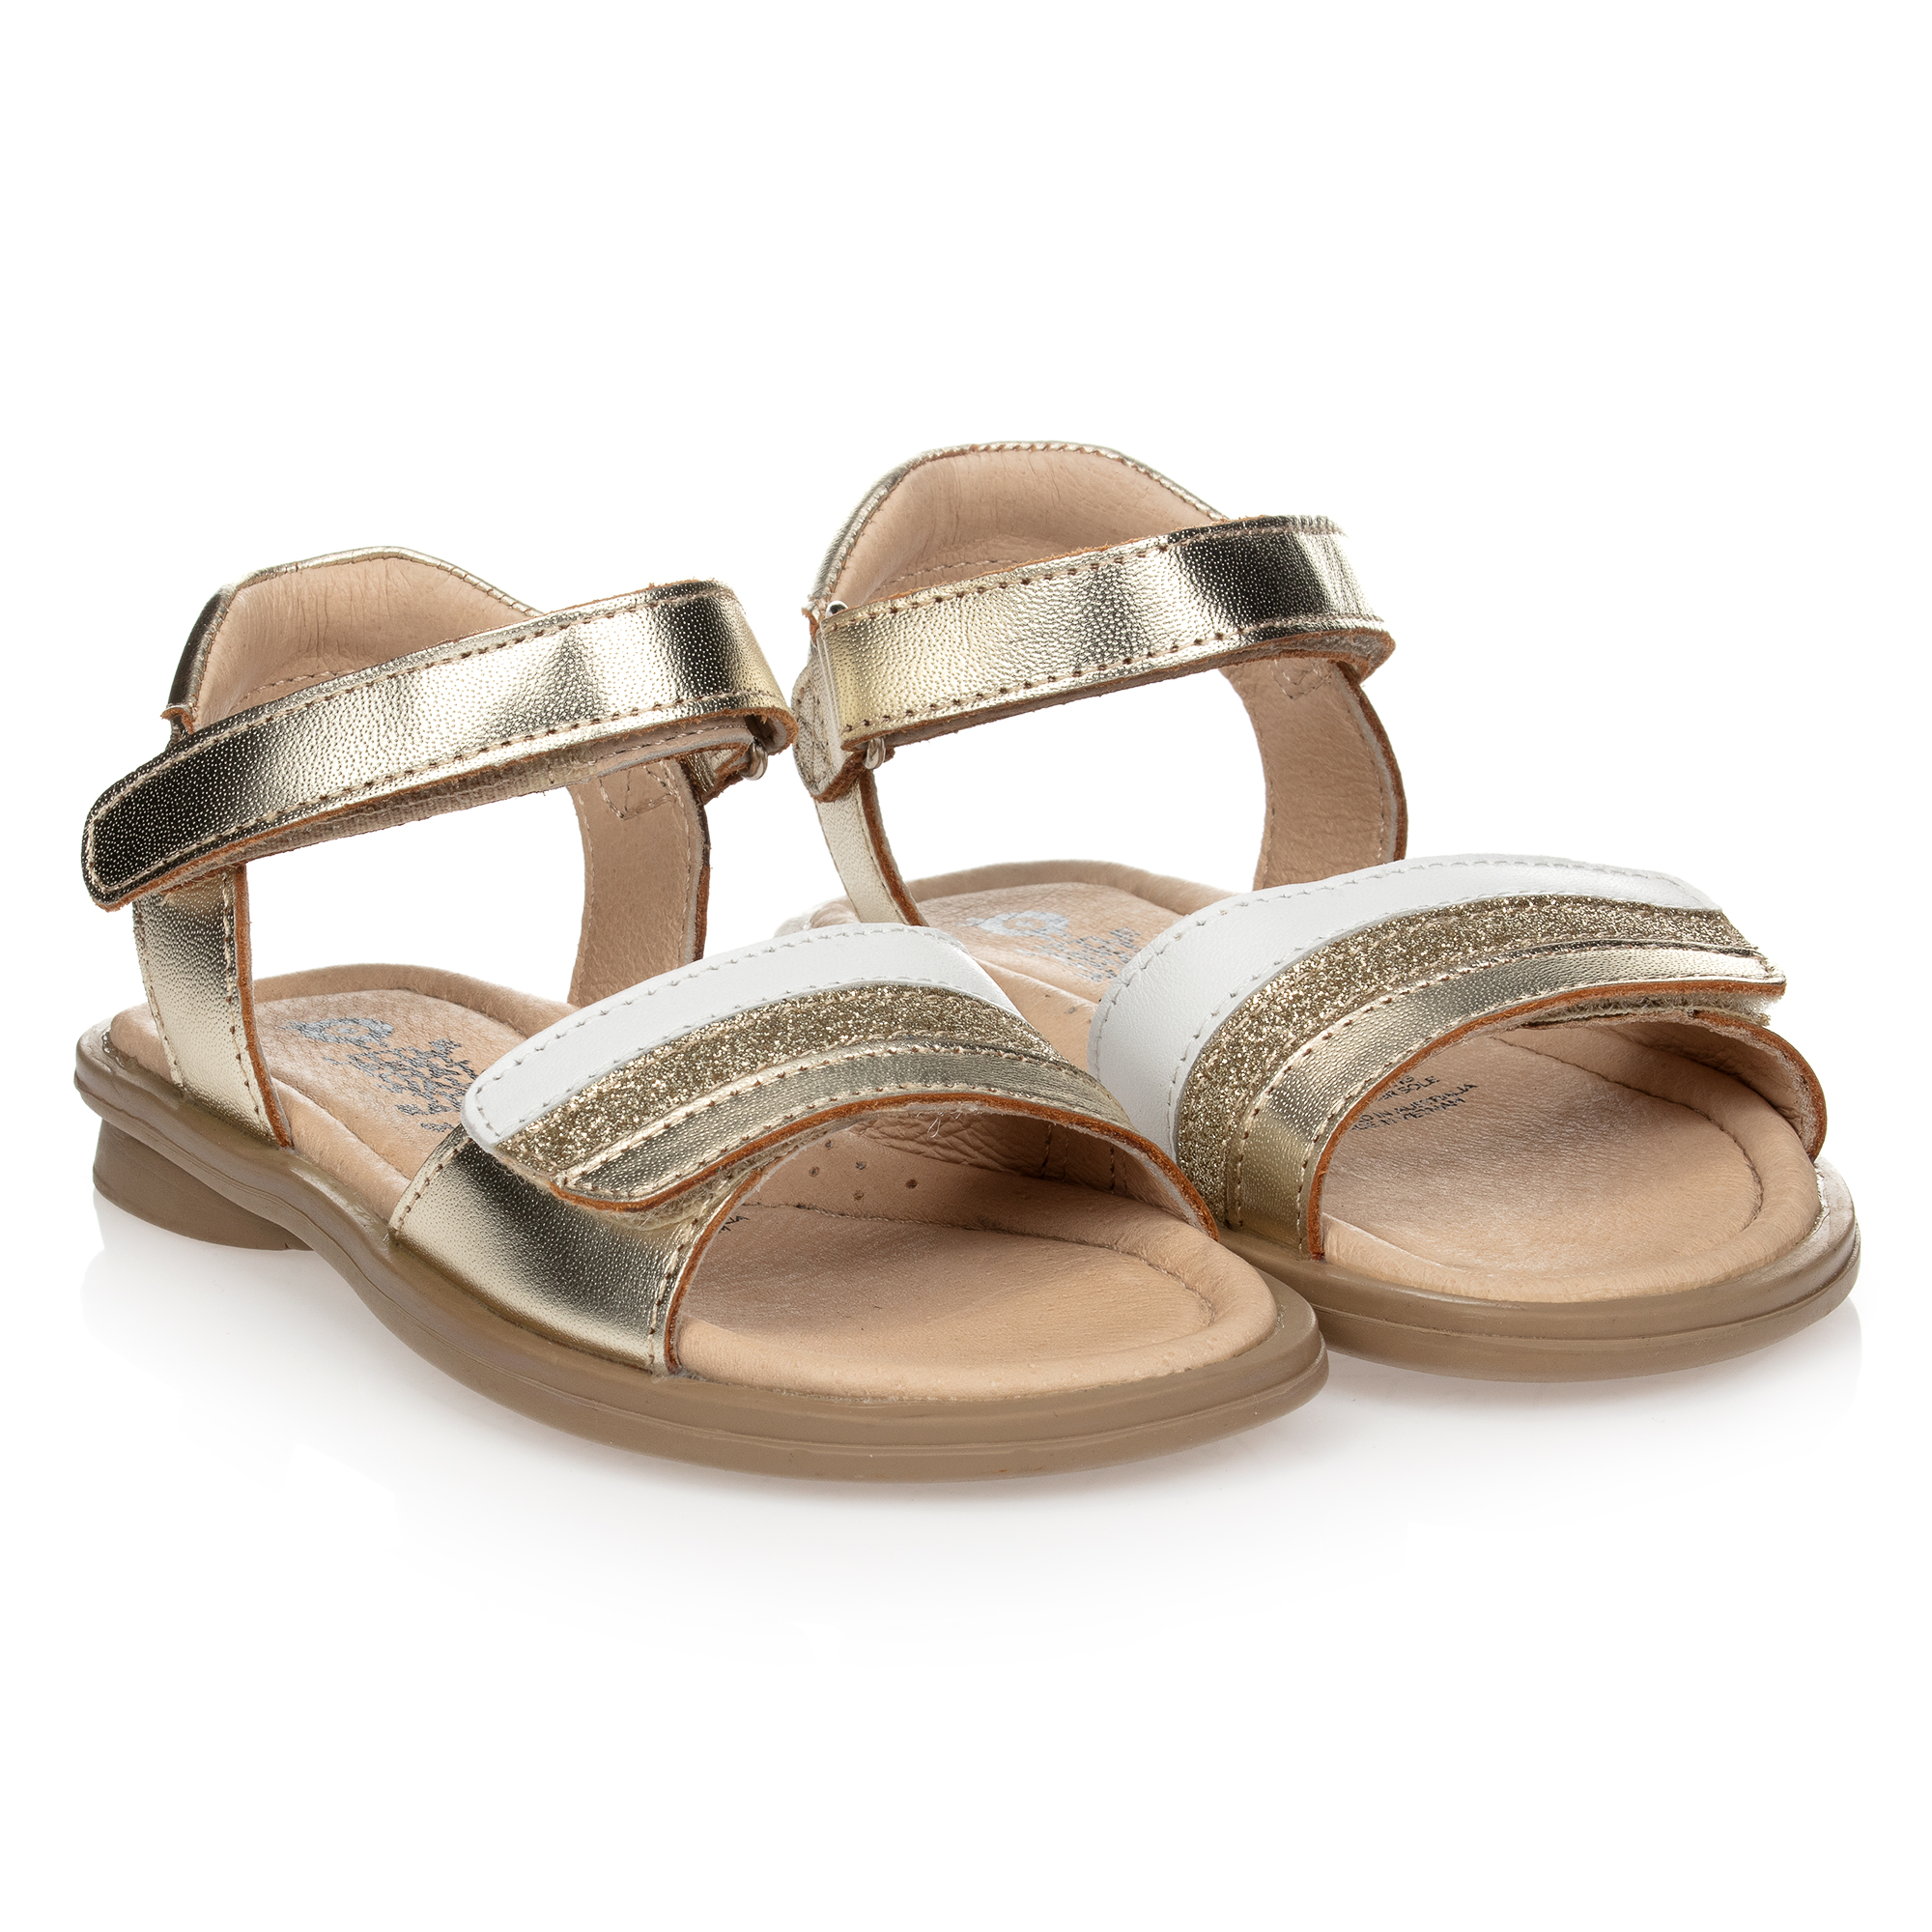 Old Soles - Pink & Silver Leather Sandals | Childrensalon